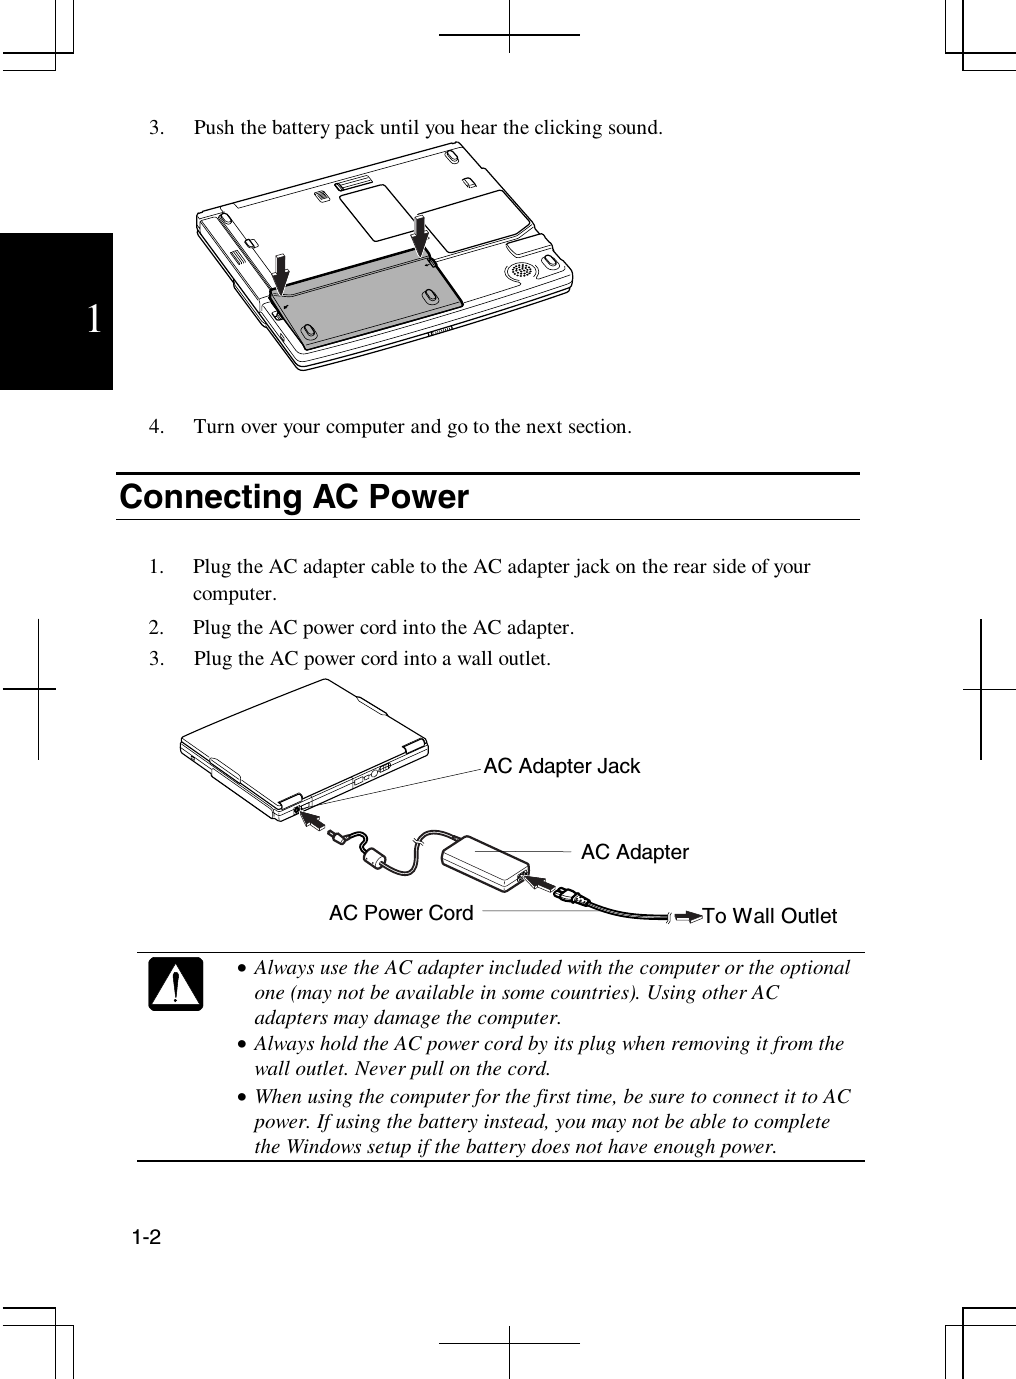 1-213. Push the battery pack until you hear the clicking sound.4. Turn over your computer and go to the next section.Connecting AC Power1. Plug the AC adapter cable to the AC adapter jack on the rear side of yourcomputer.2. Plug the AC power cord into the AC adapter.3. Plug the AC power cord into a wall outlet.•  Always use the AC adapter included with the computer or the optionalone (may not be available in some countries). Using other ACadapters may damage the computer.•  Always hold the AC power cord by its plug when removing it from thewall outlet. Never pull on the cord.•  When using the computer for the first time, be sure to connect it to ACpower. If using the battery instead, you may not be able to completethe Windows setup if the battery does not have enough power.AC AdapterAC Power Cord To Wall OutletAC Adapter Jack